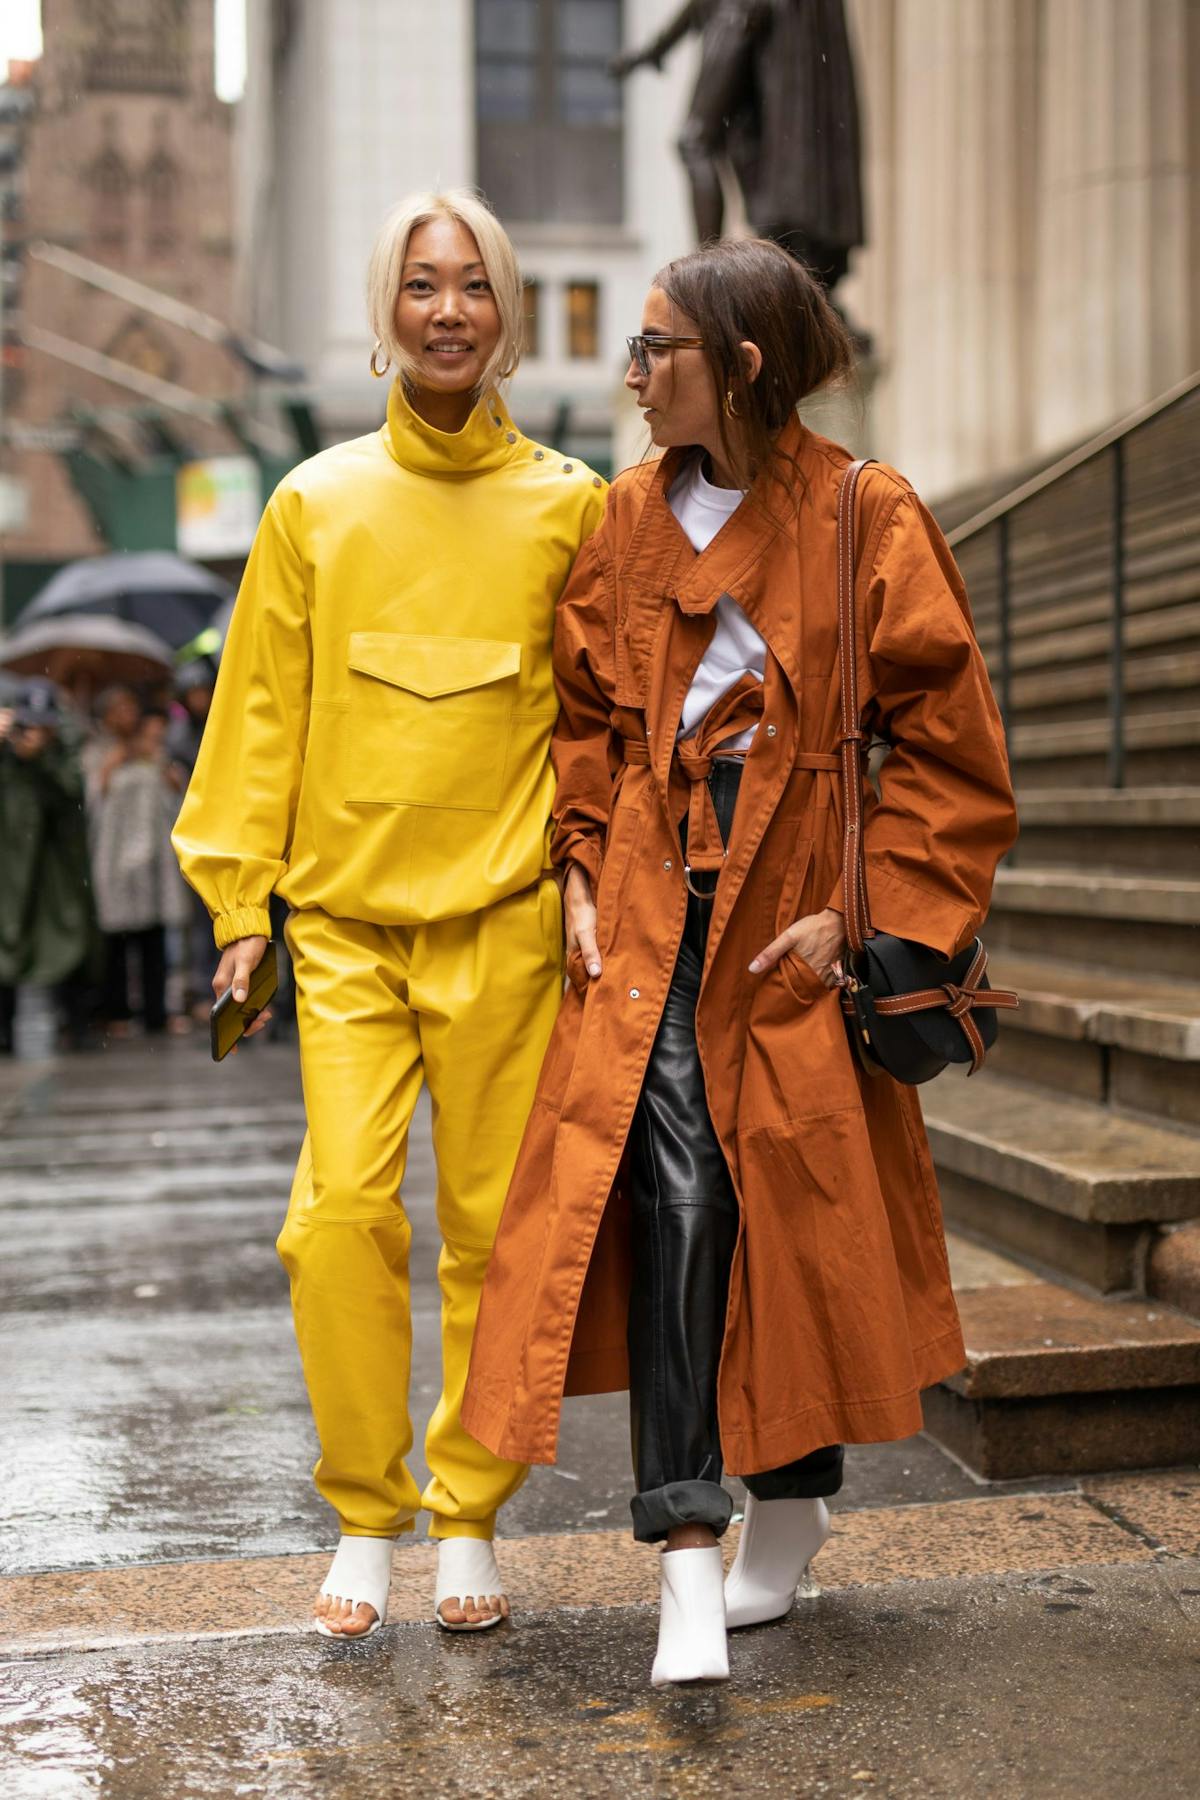 New York Fashion Week: the best street style moments so far